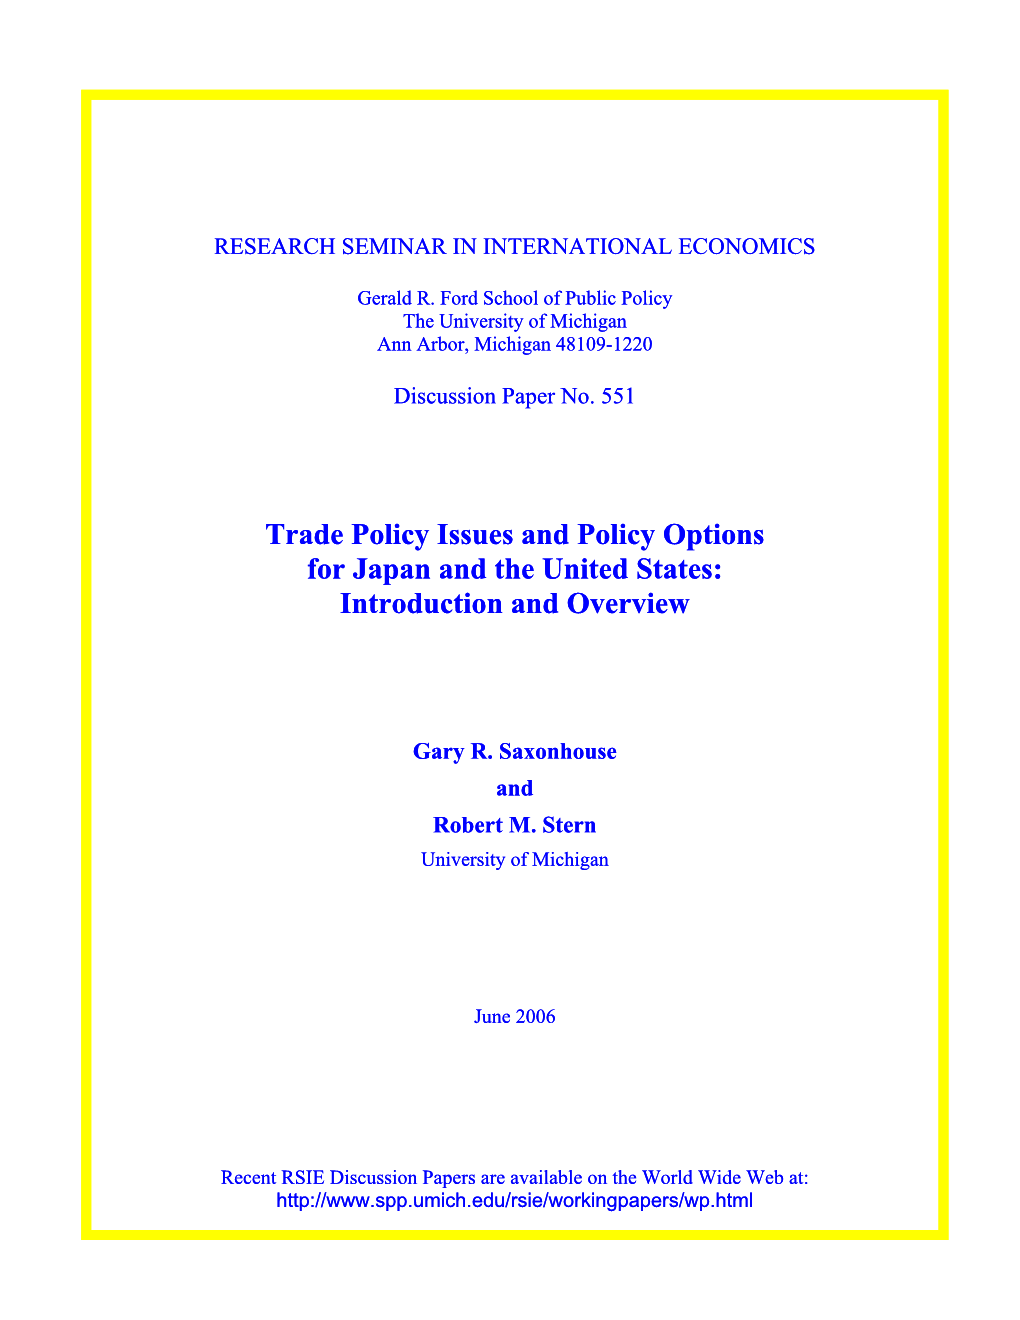 Trade-Policy Issues and Policy Options for Japan and the United States